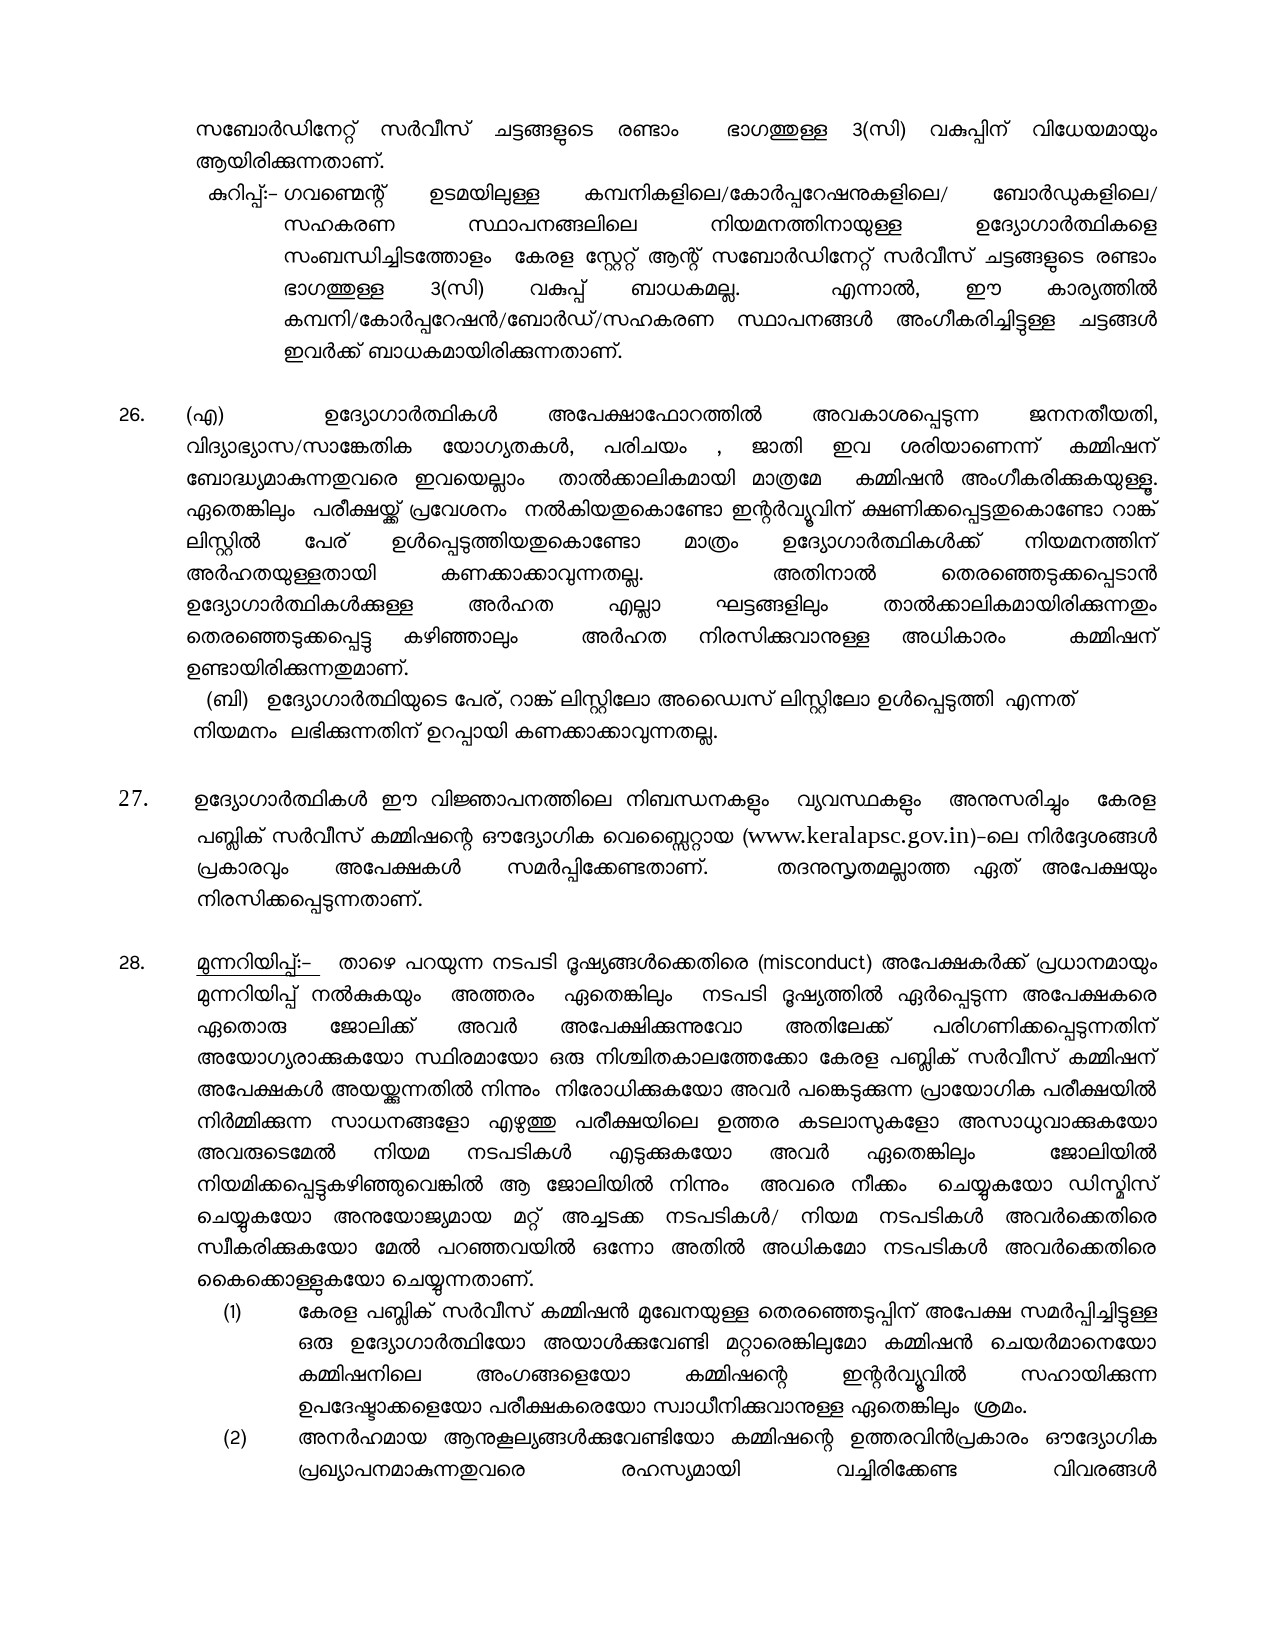 General Conditions and Certificate Formats in Malayalam - Notification Image 25